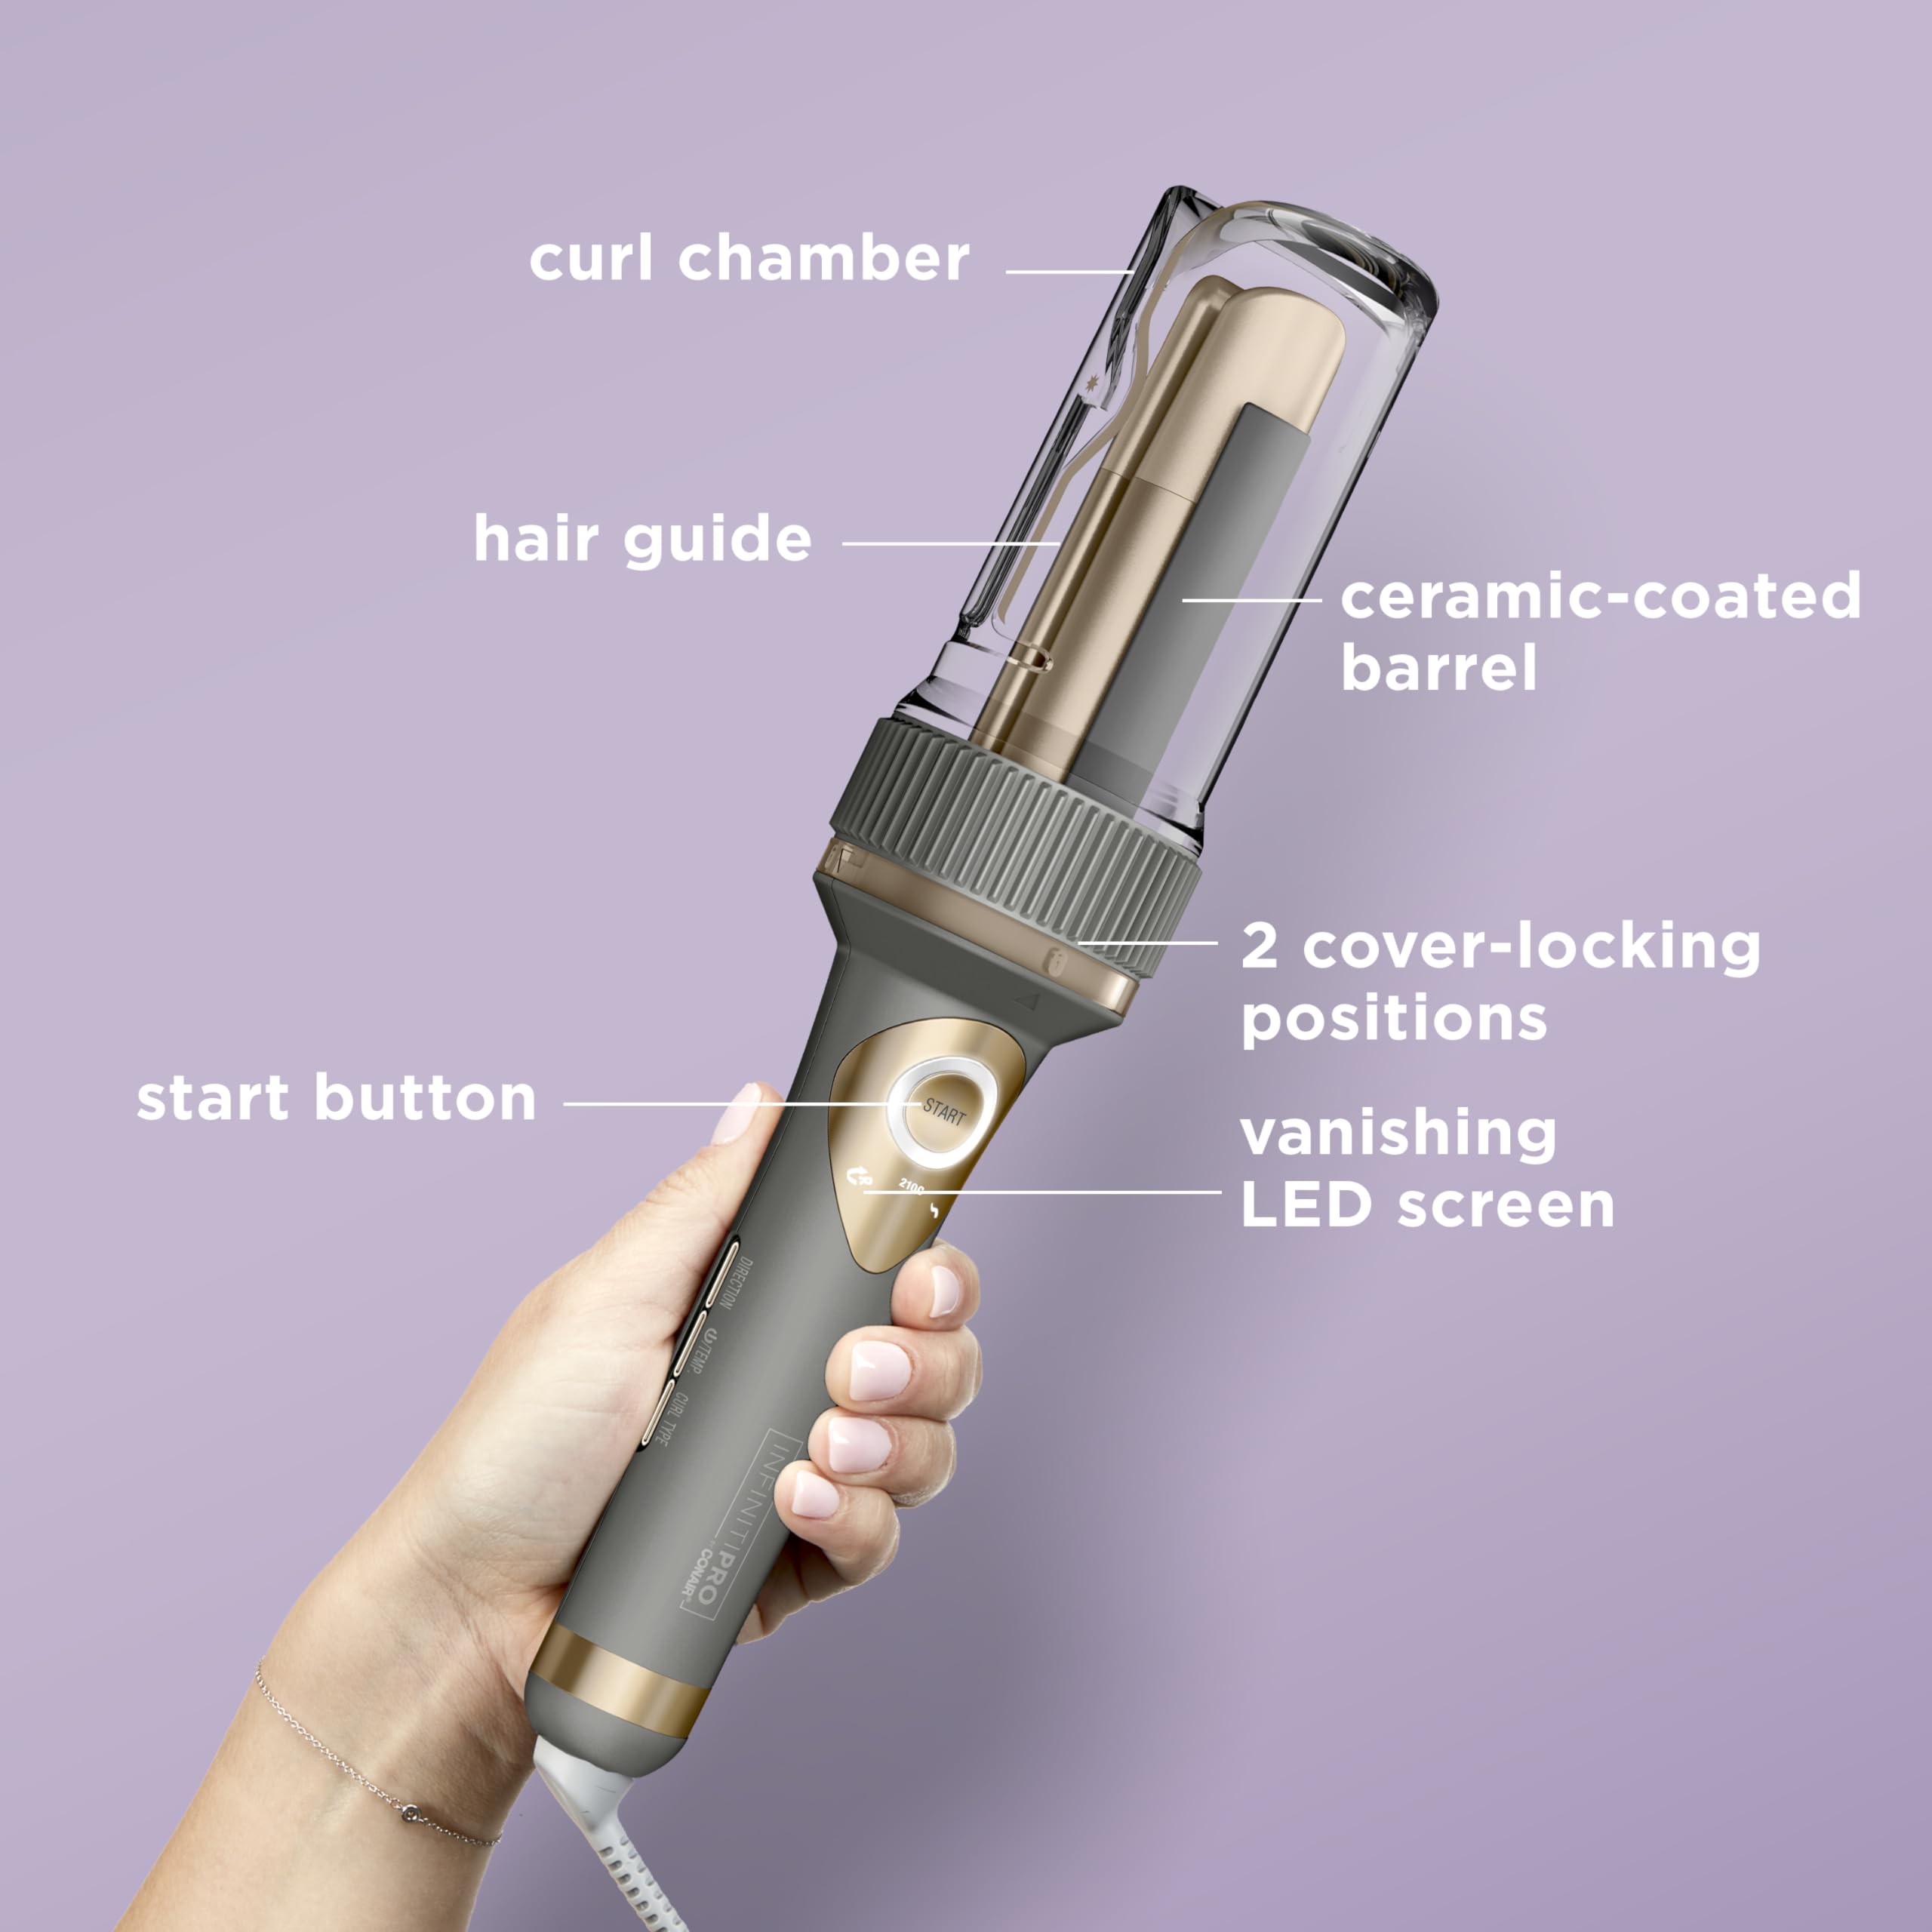 INFINITIPRO by CONAIR Curl Secret Automatic Curling Iron - 1 1/4-inch Barrel - Hair Curler for All Hair Types and Medium to Long Hair Lengths - Dual Voltage for Worldwide Travel